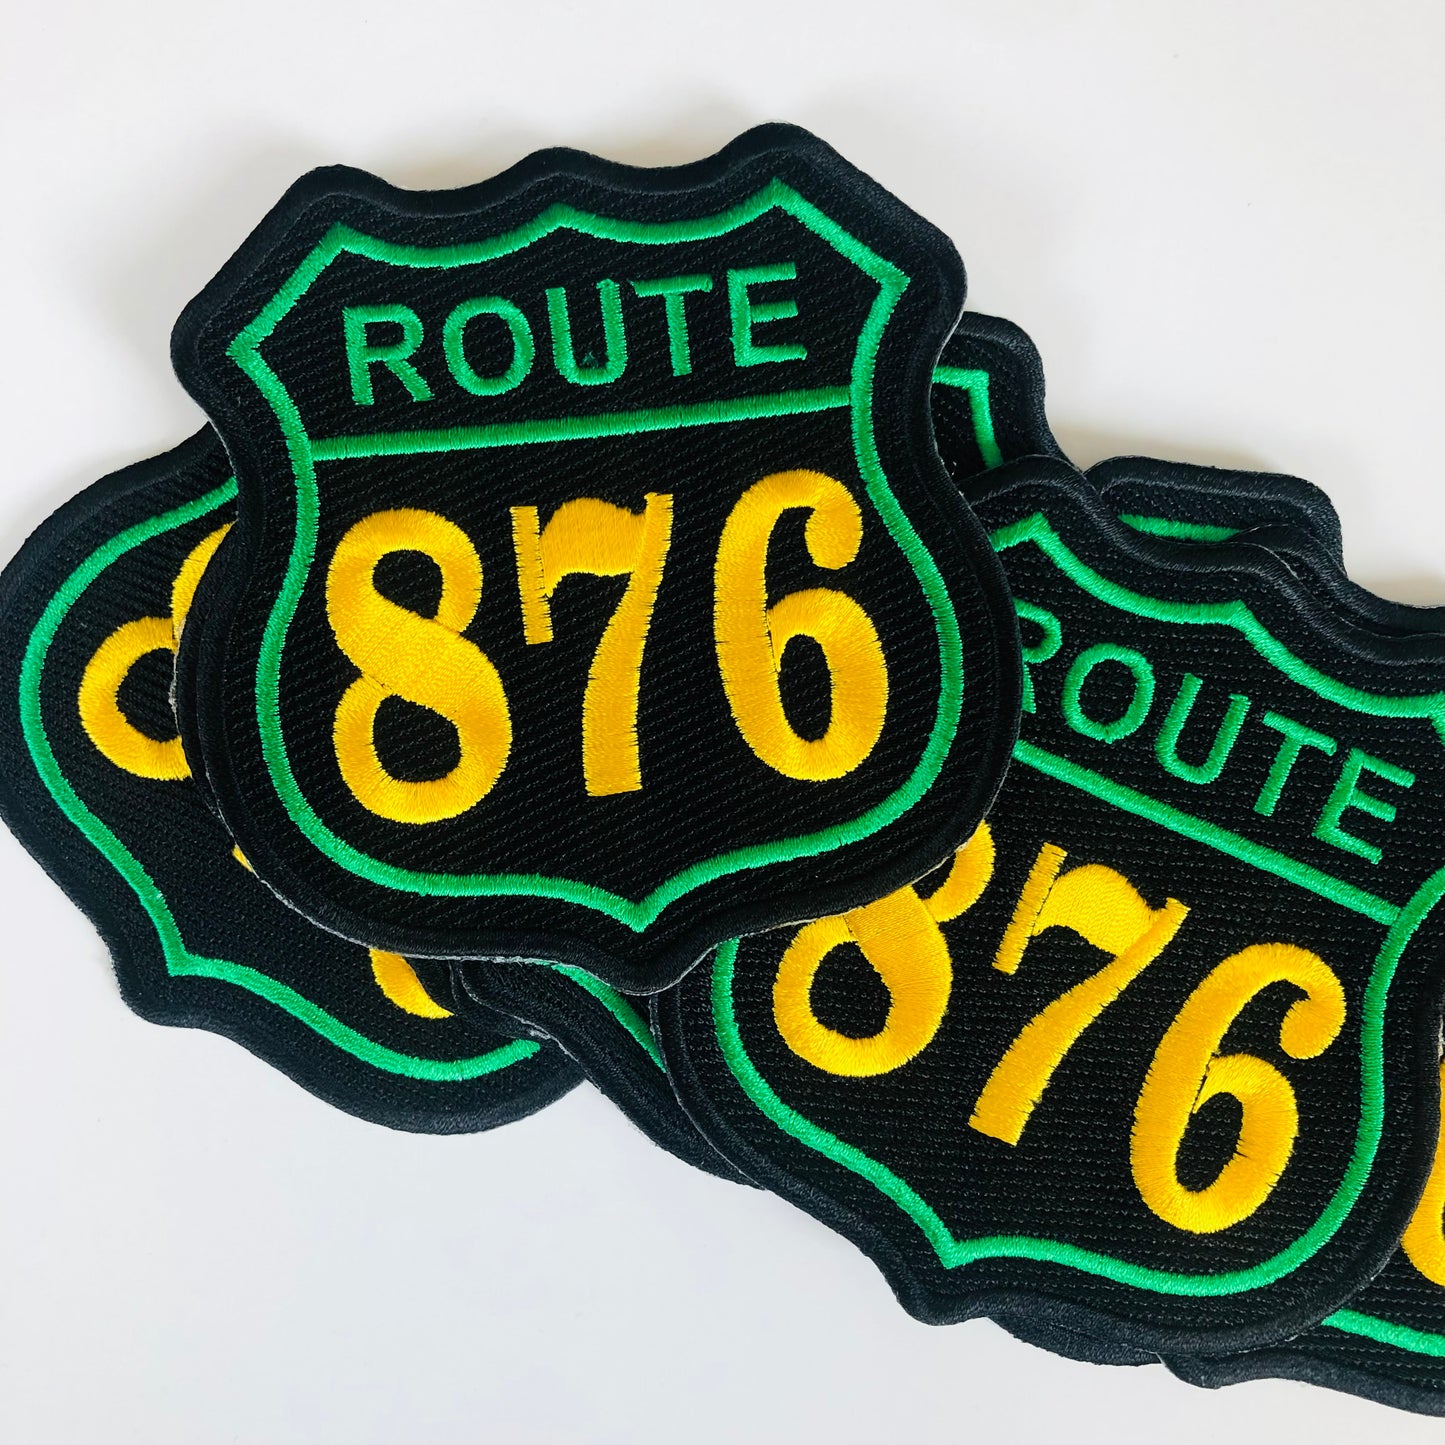 Route 876 Patch